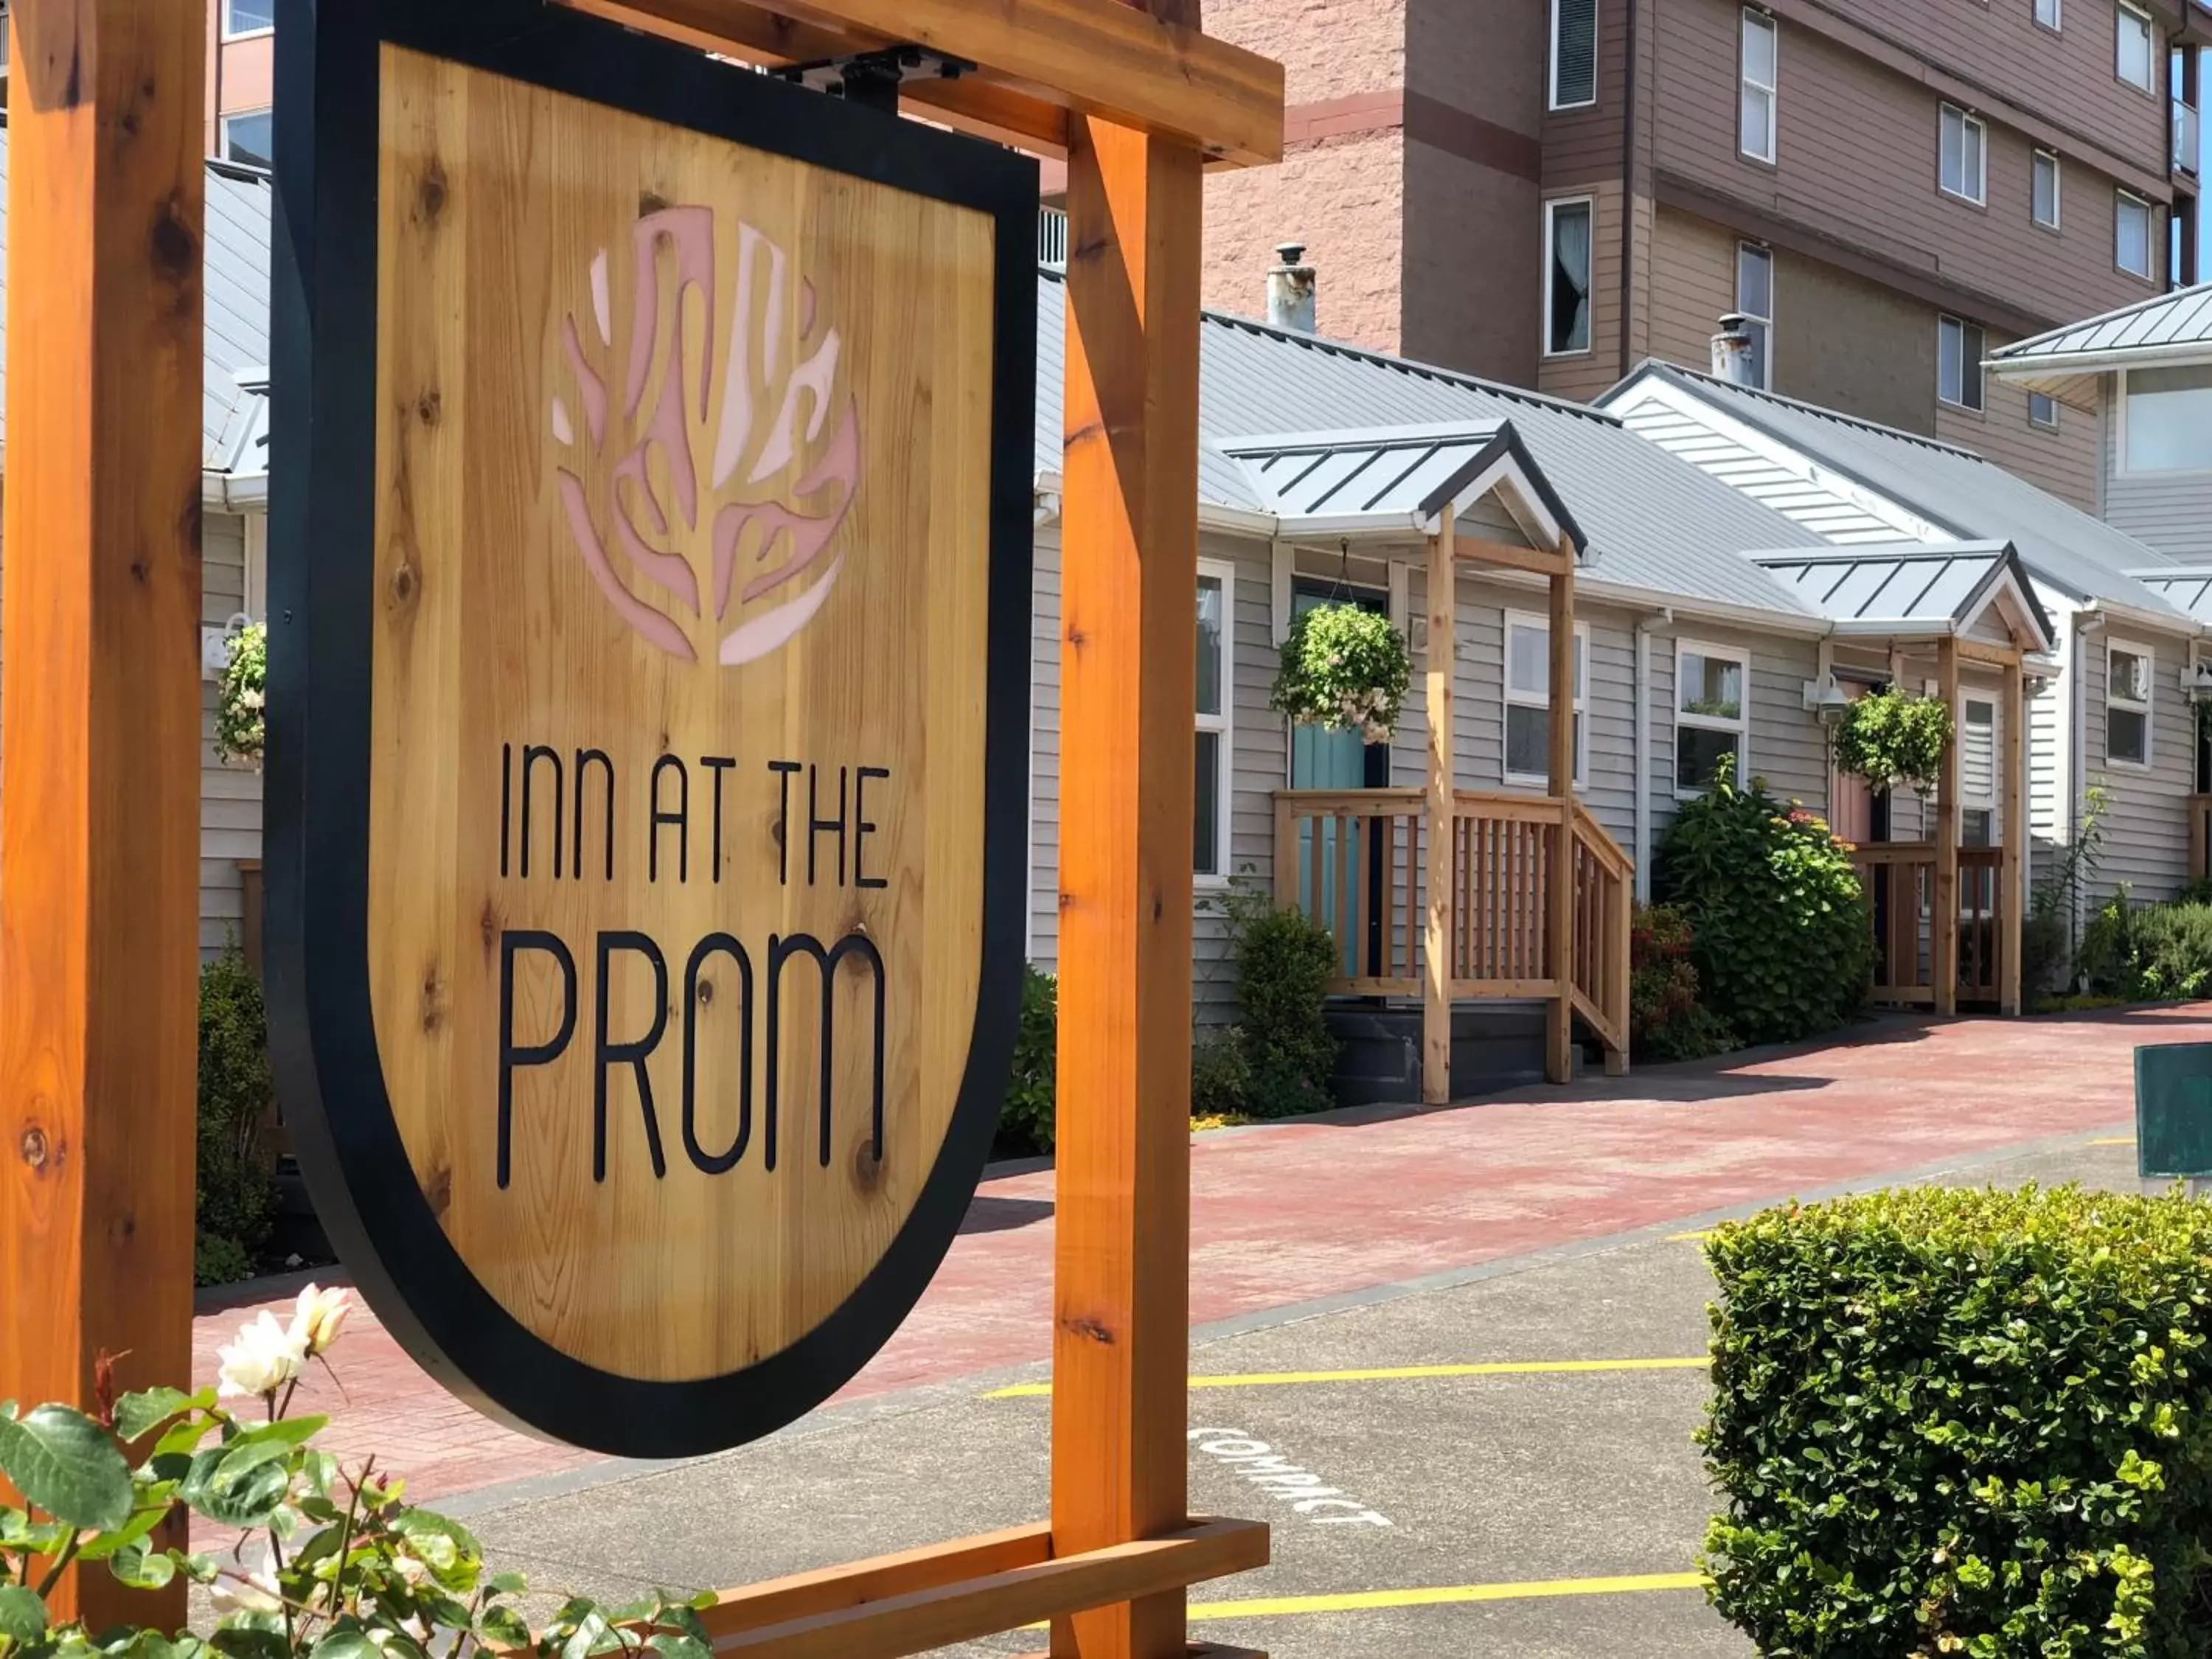 Facade/entrance in Inn at the Prom